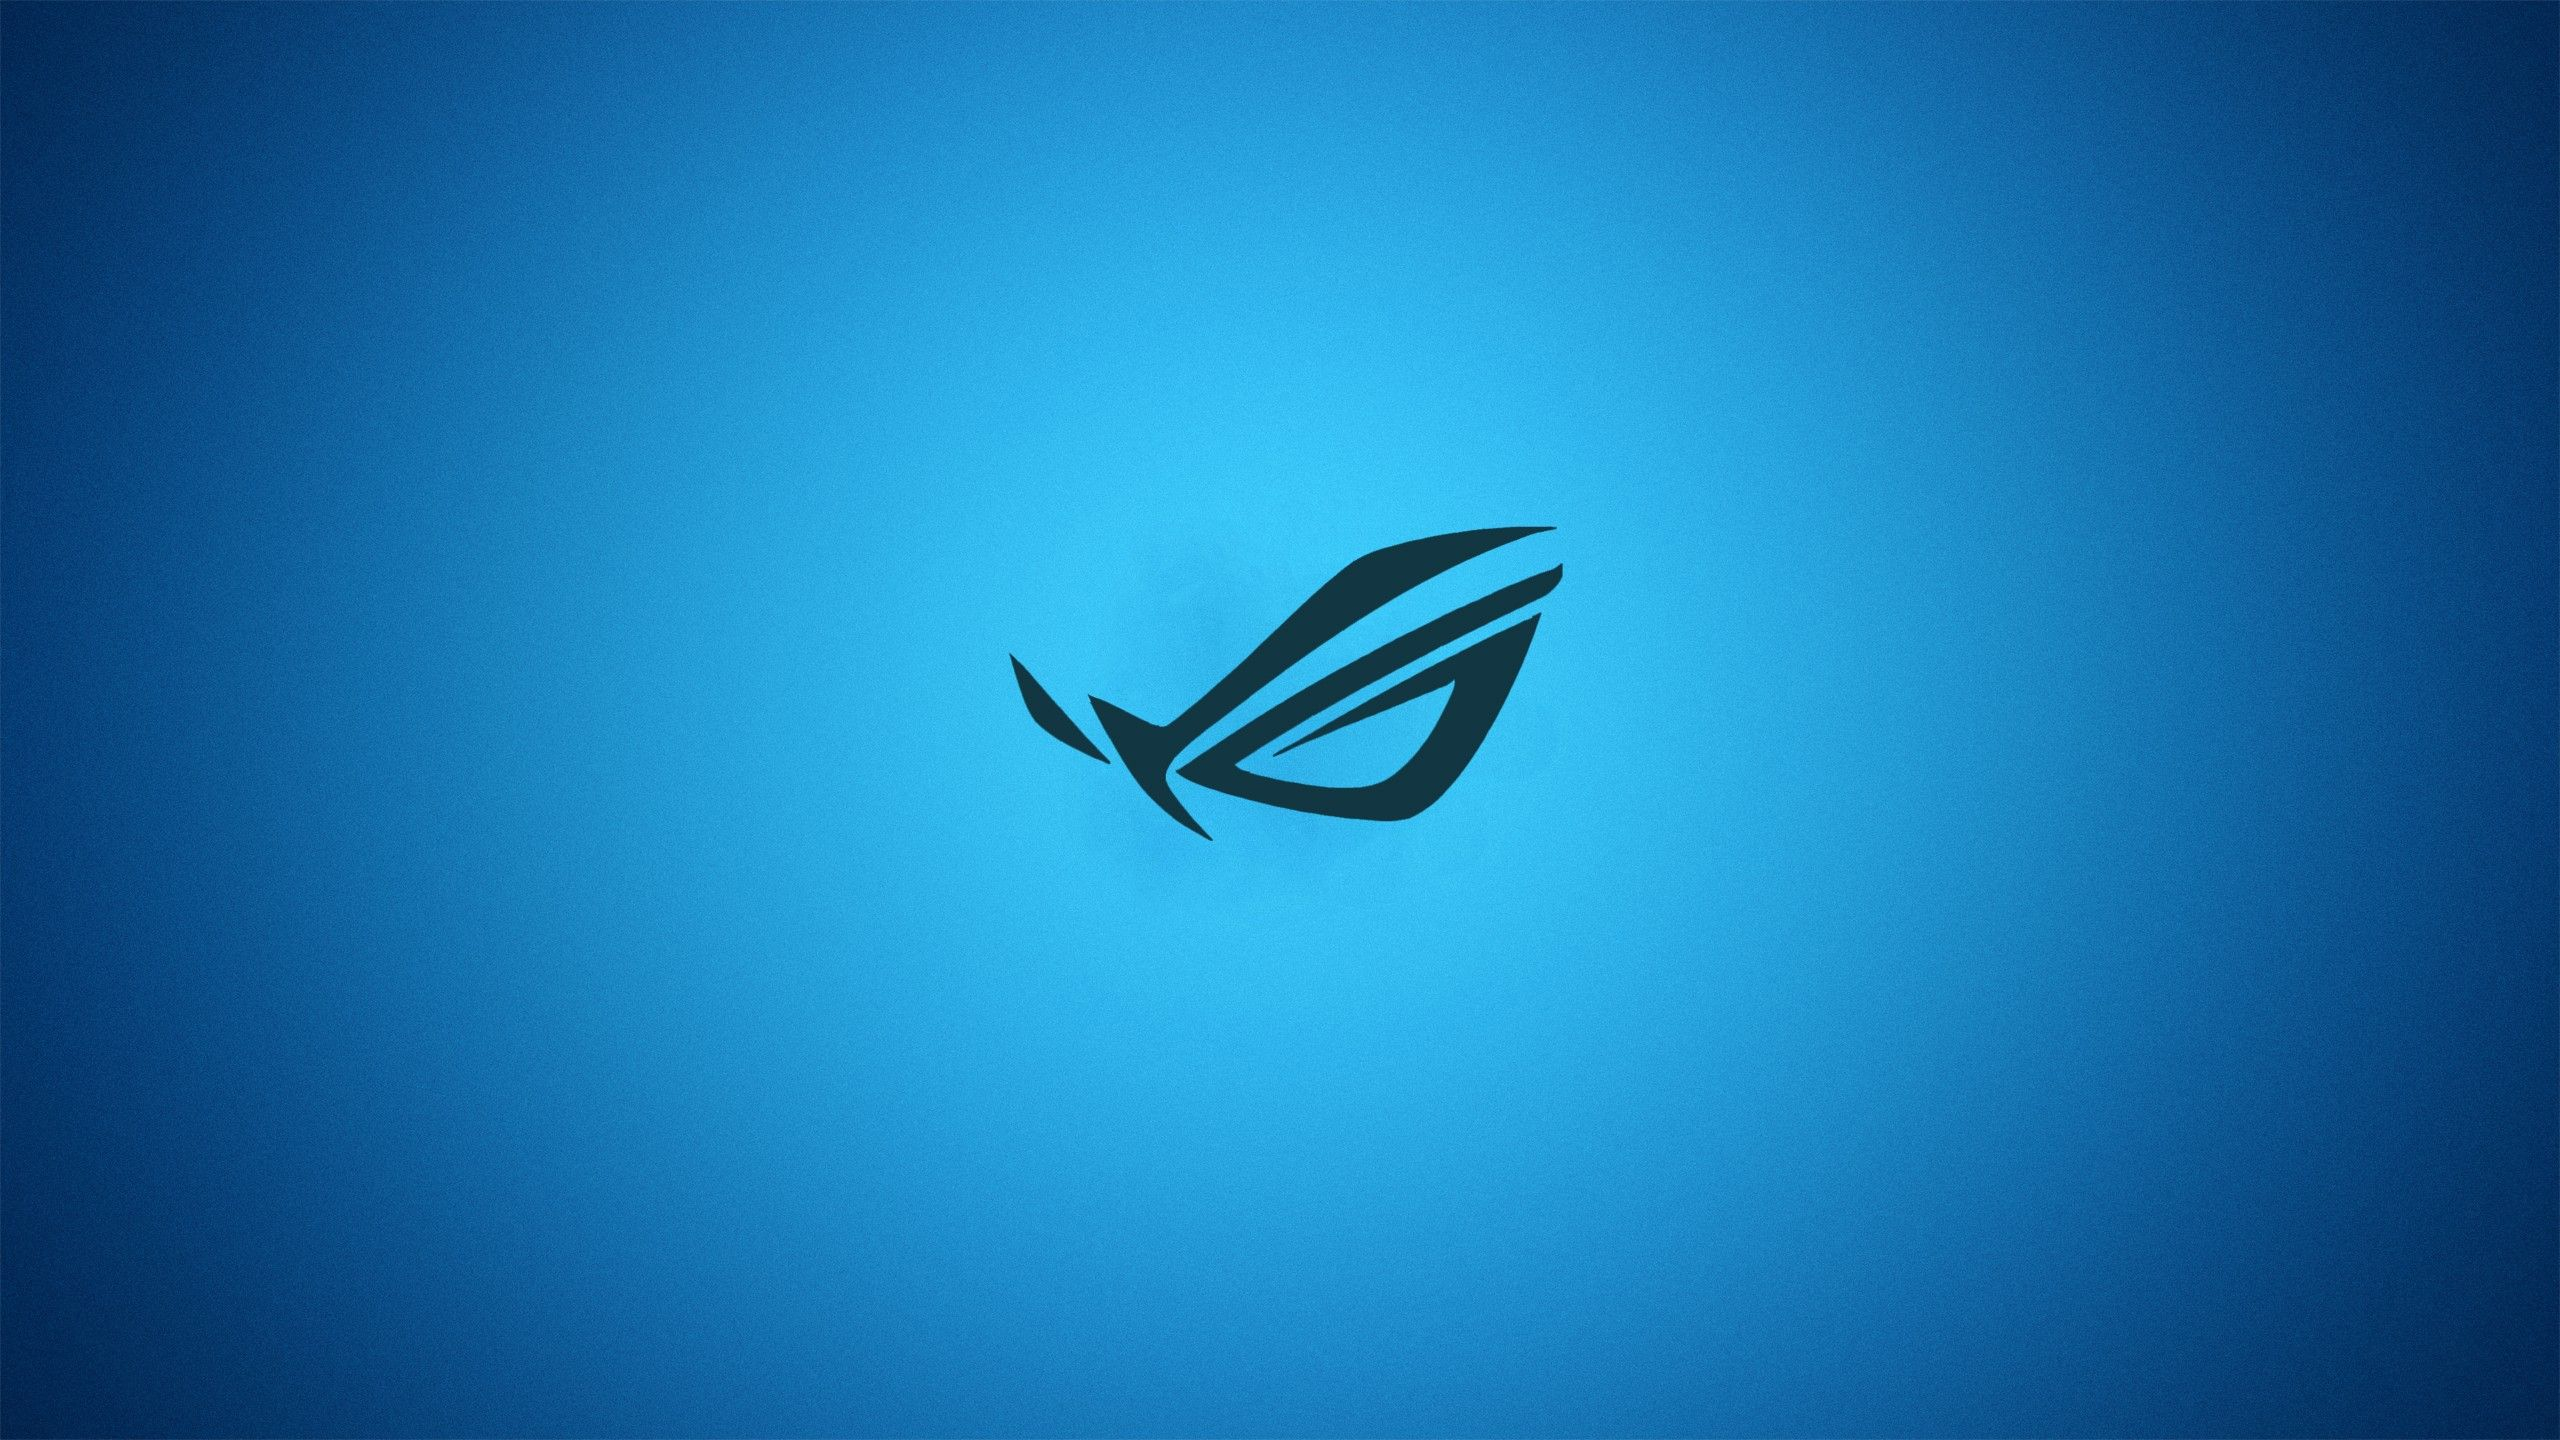 2560x1440 Asus Blue Wallpapers Top Free Asus Blue Backgrounds